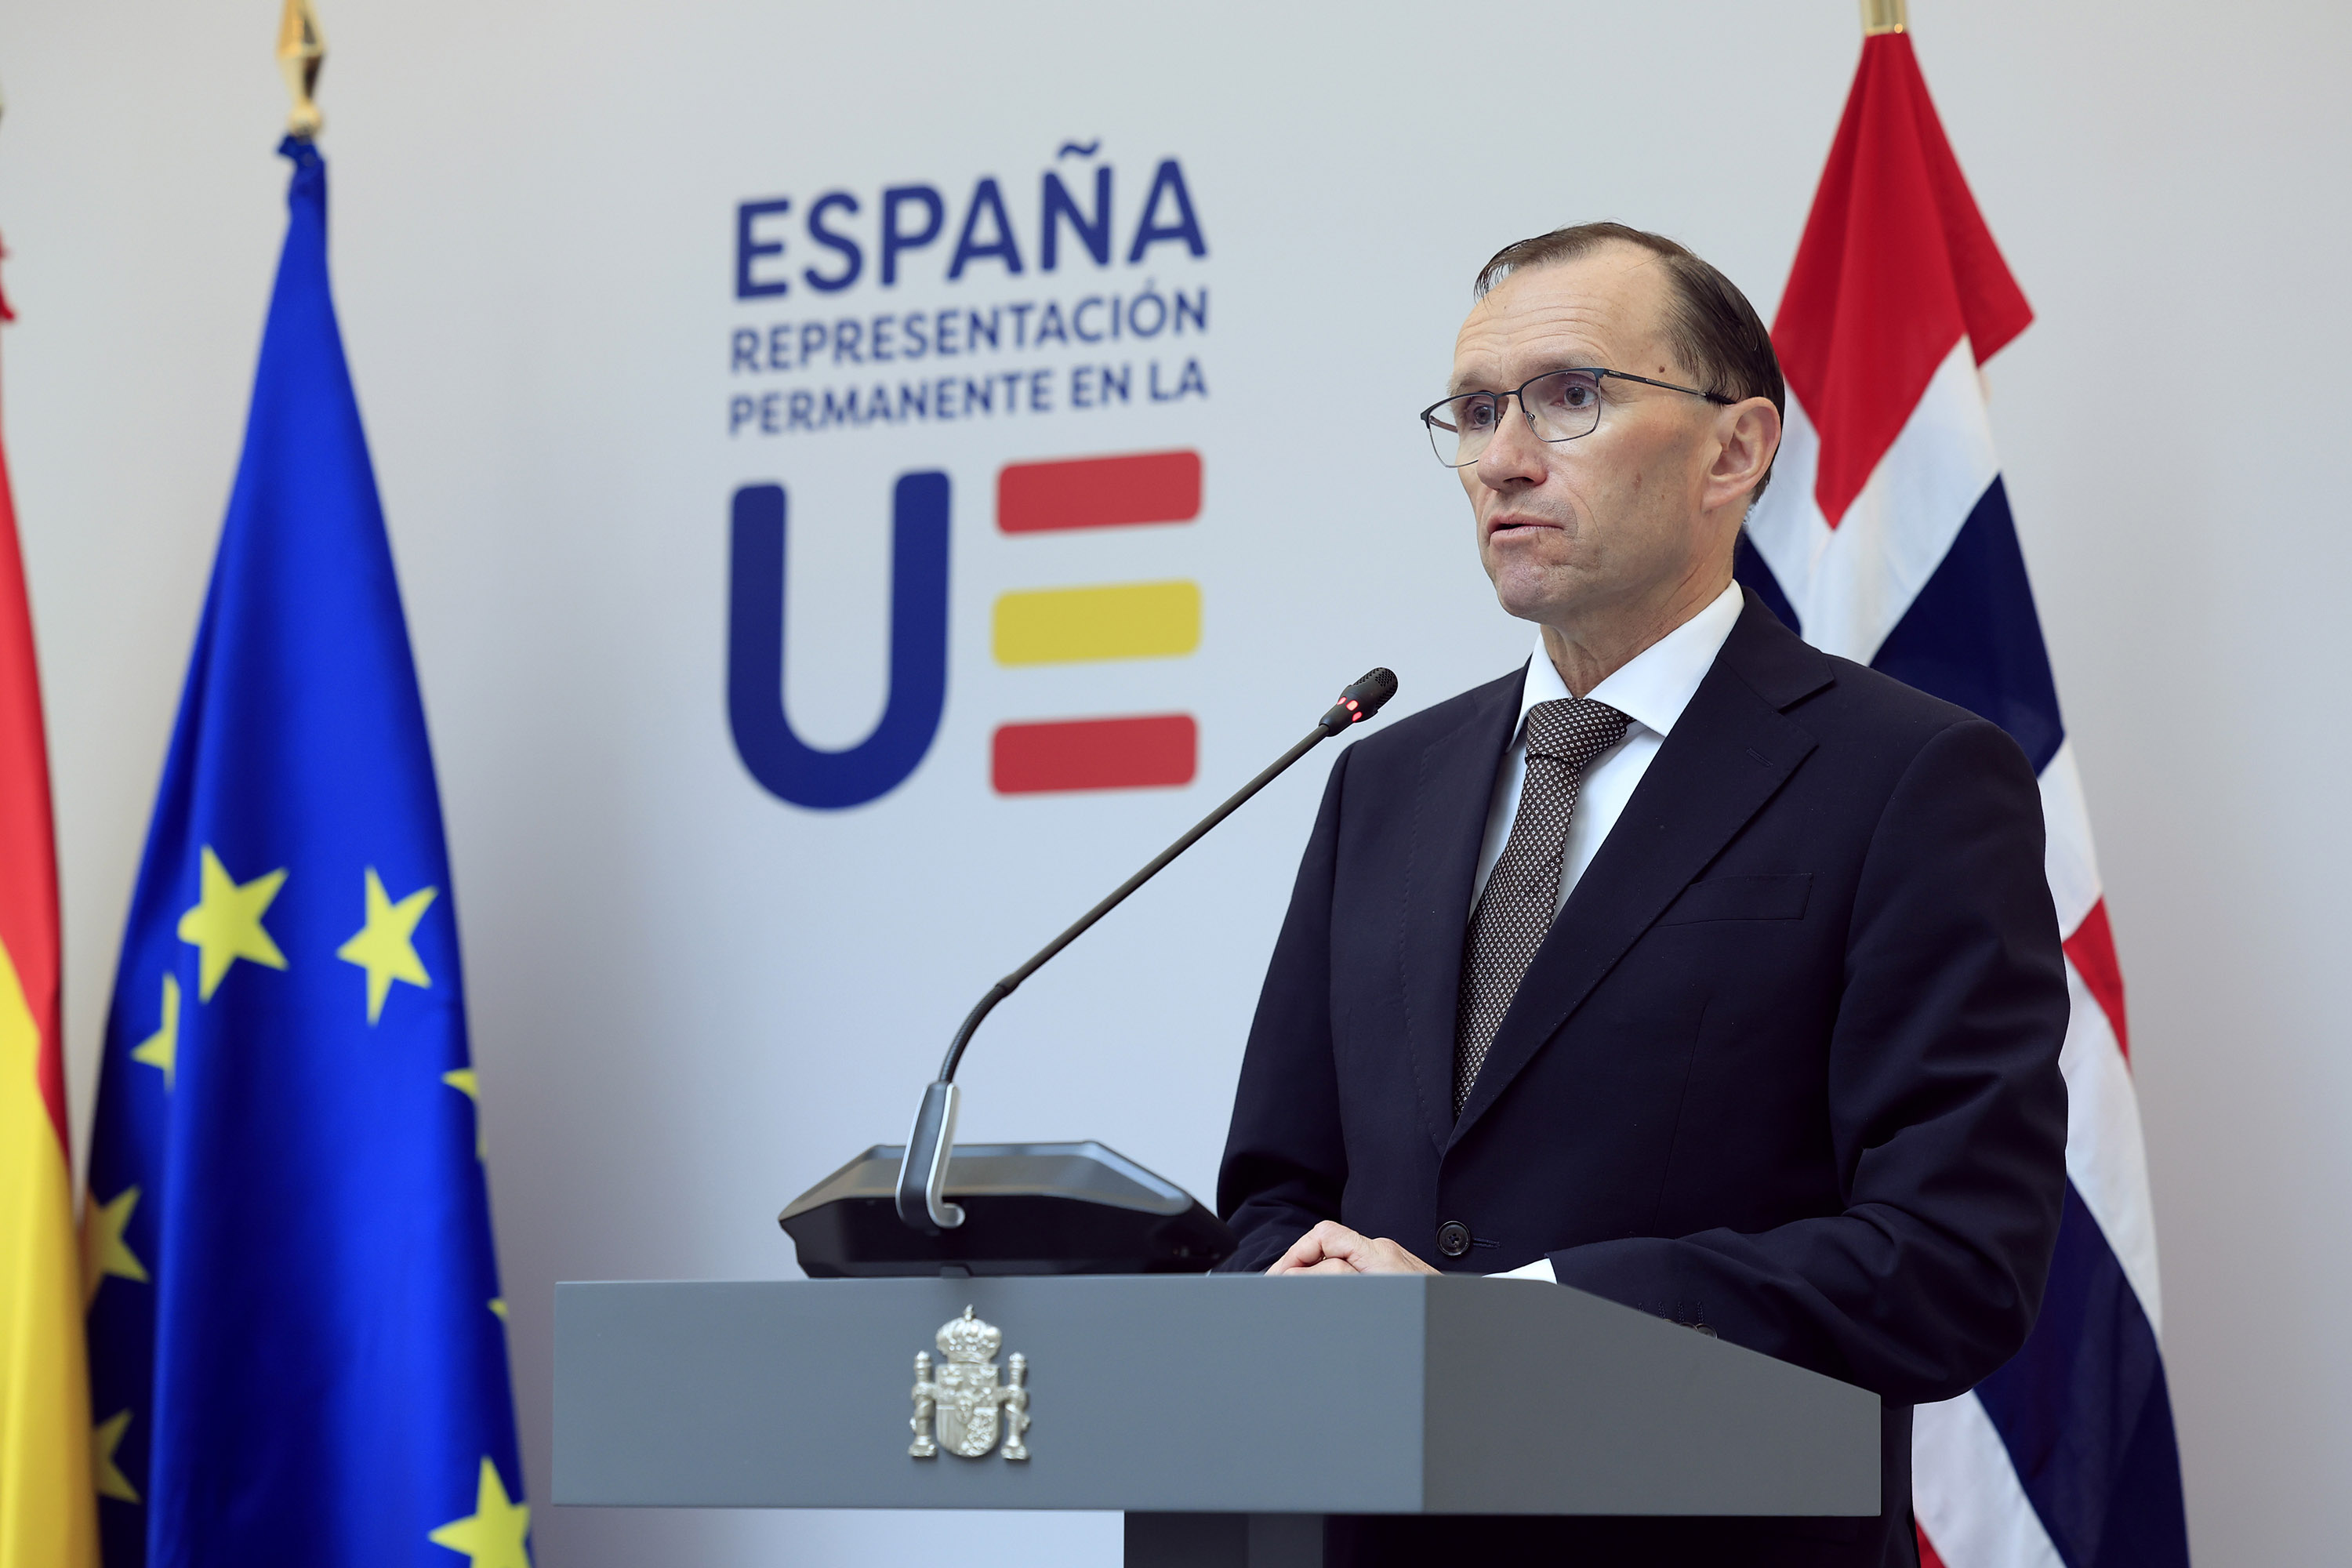 Norway's foreign minister Espen Barth Eide speaks during a press conference in Brussels on Monday, May 27.